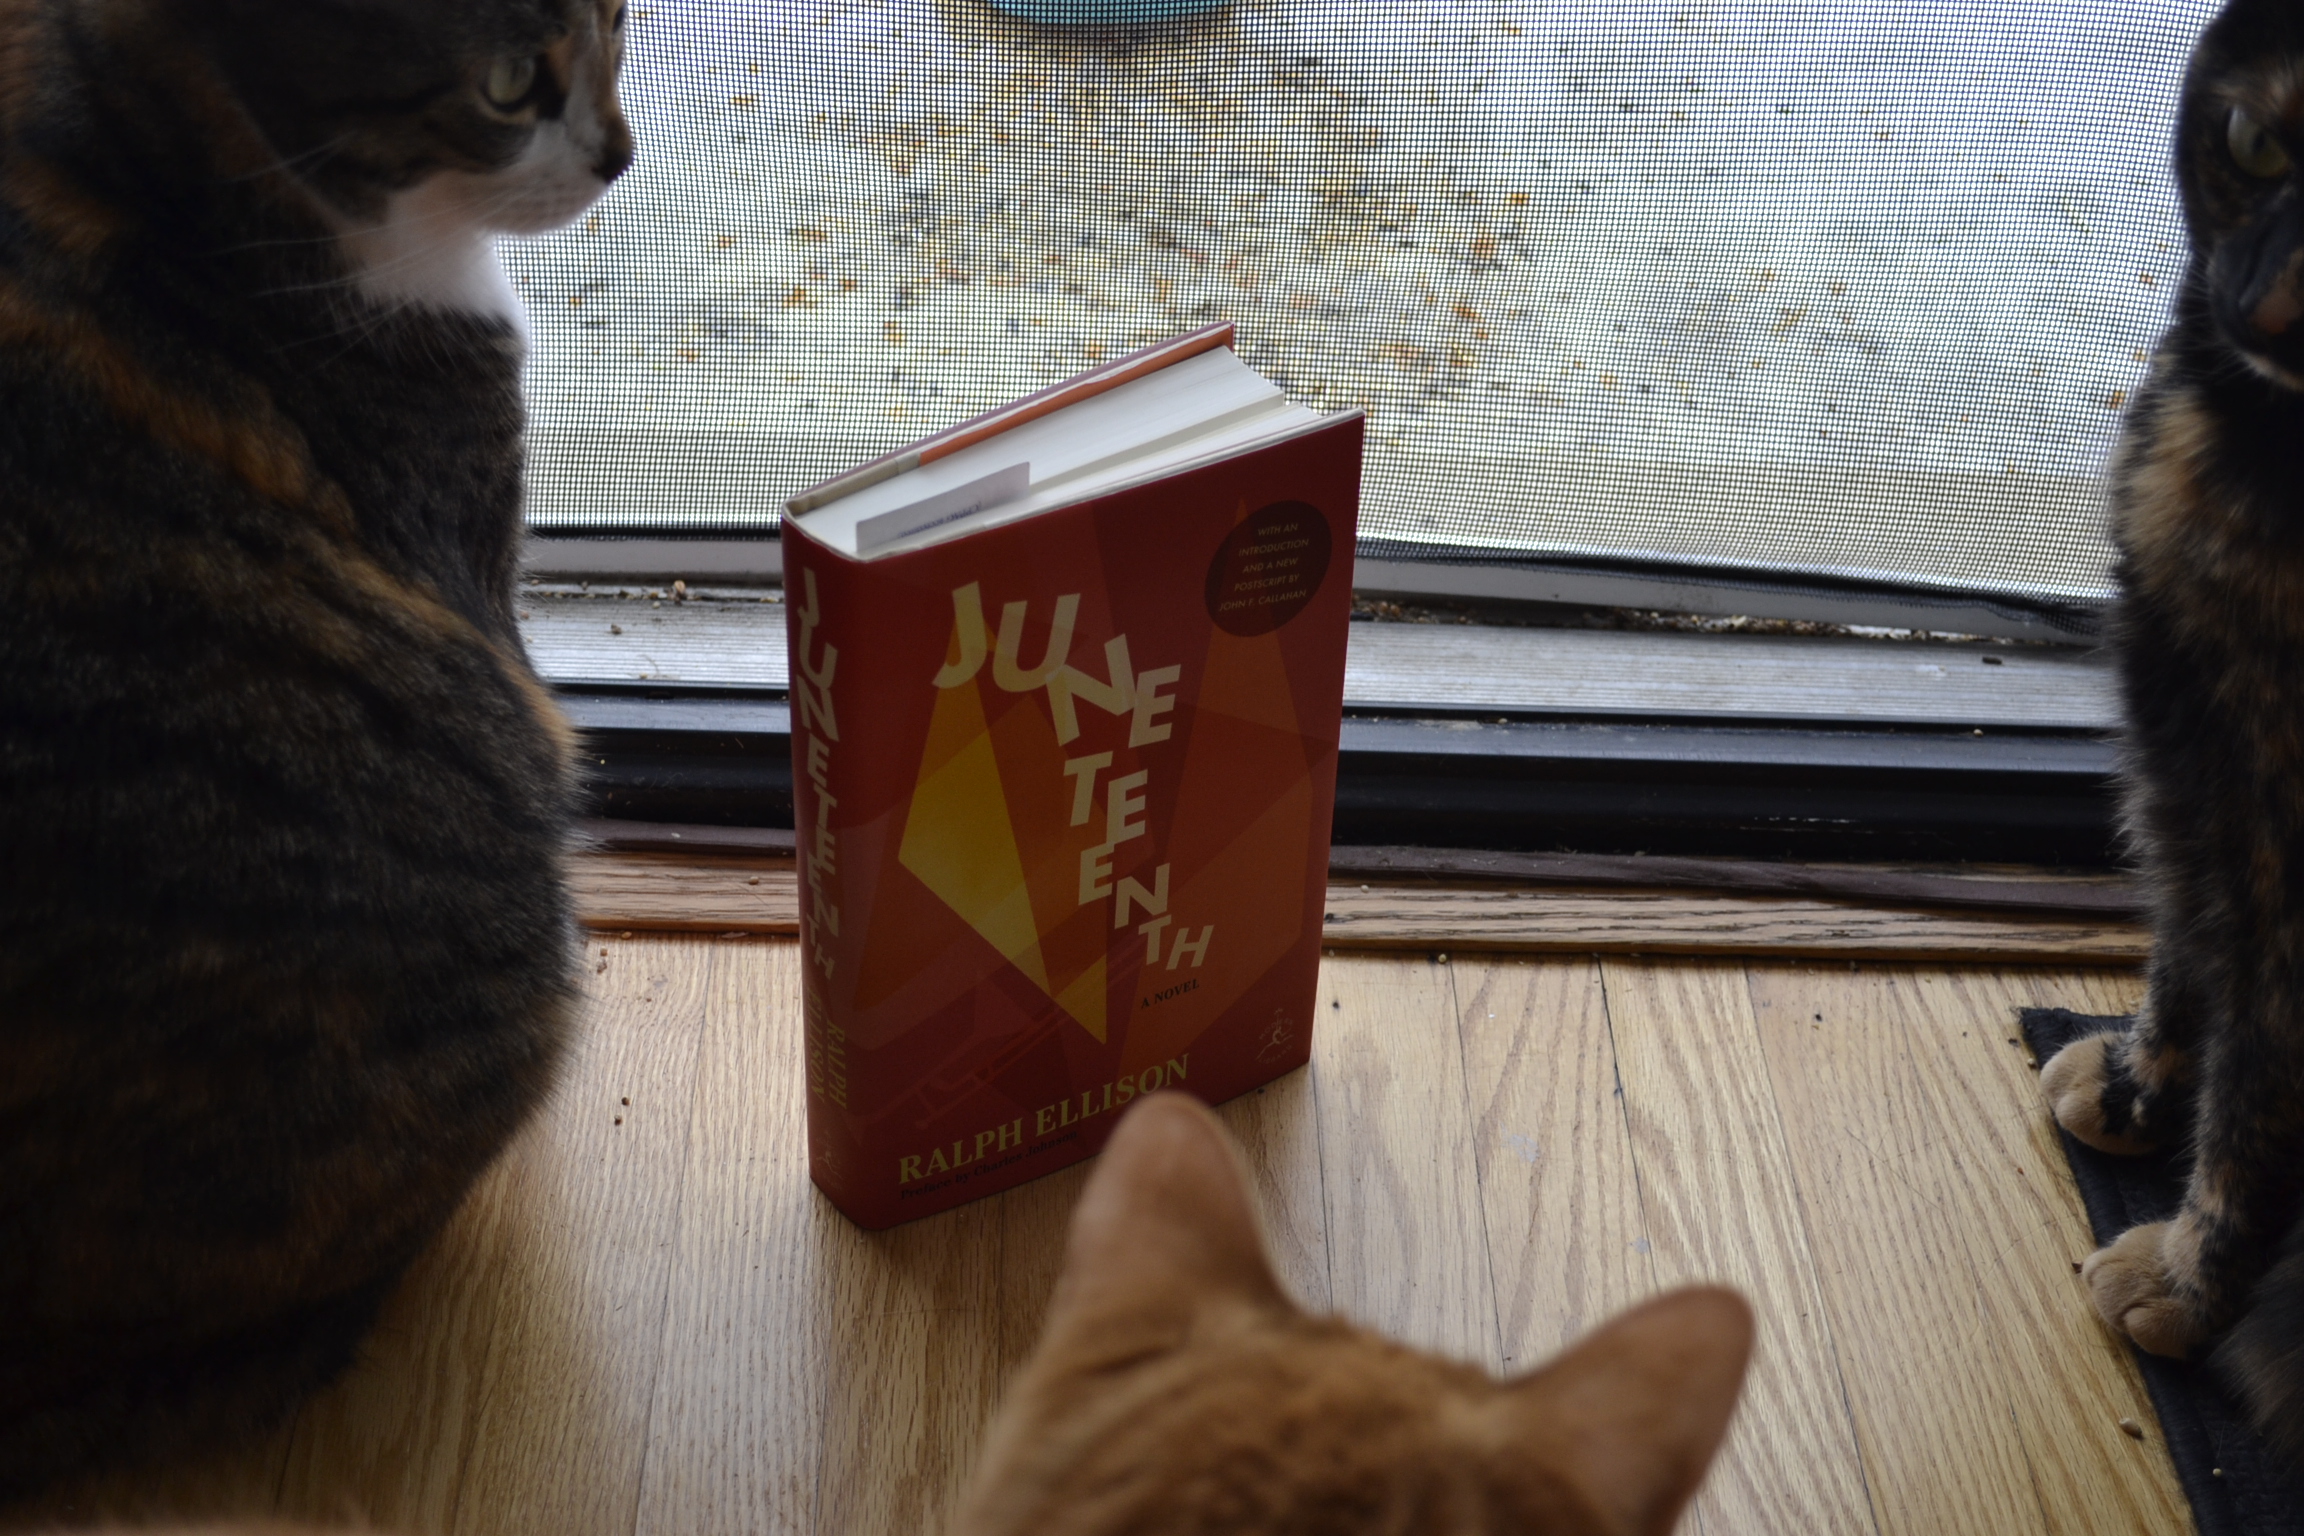 Three cats gather around a book and a screen door.